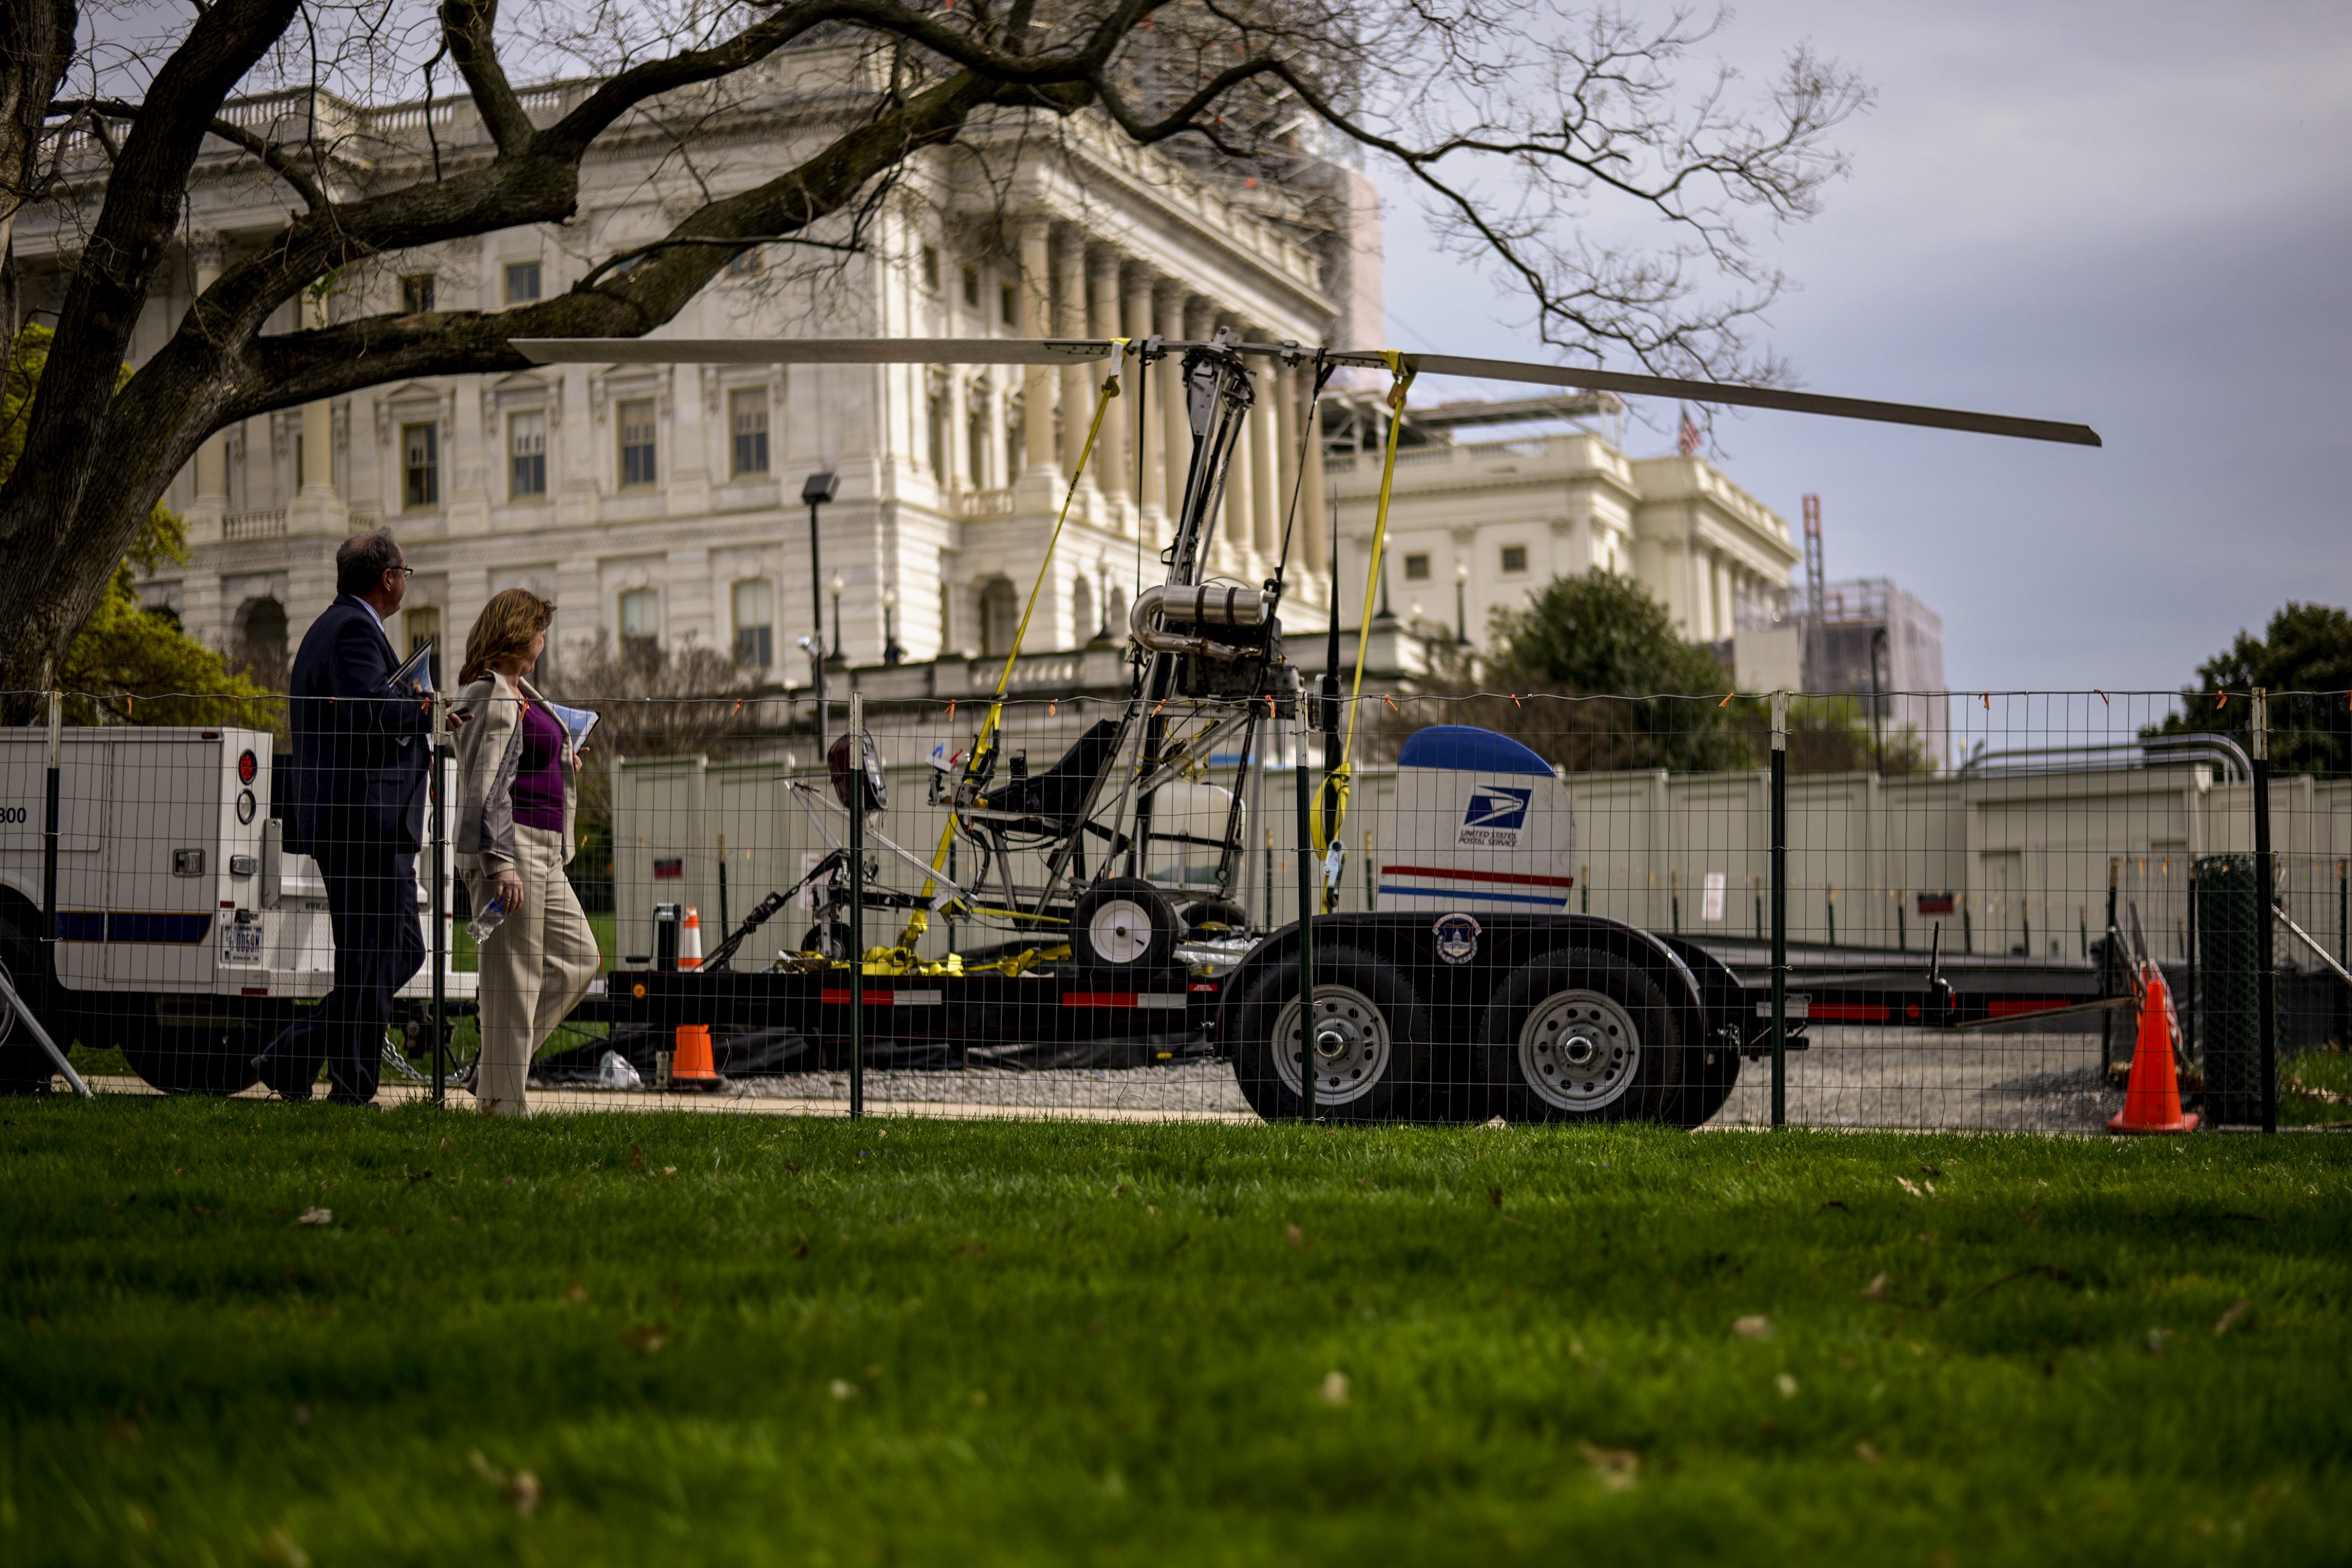 Florida man arrested after landing small helicopter on U.S. Capitol grounds